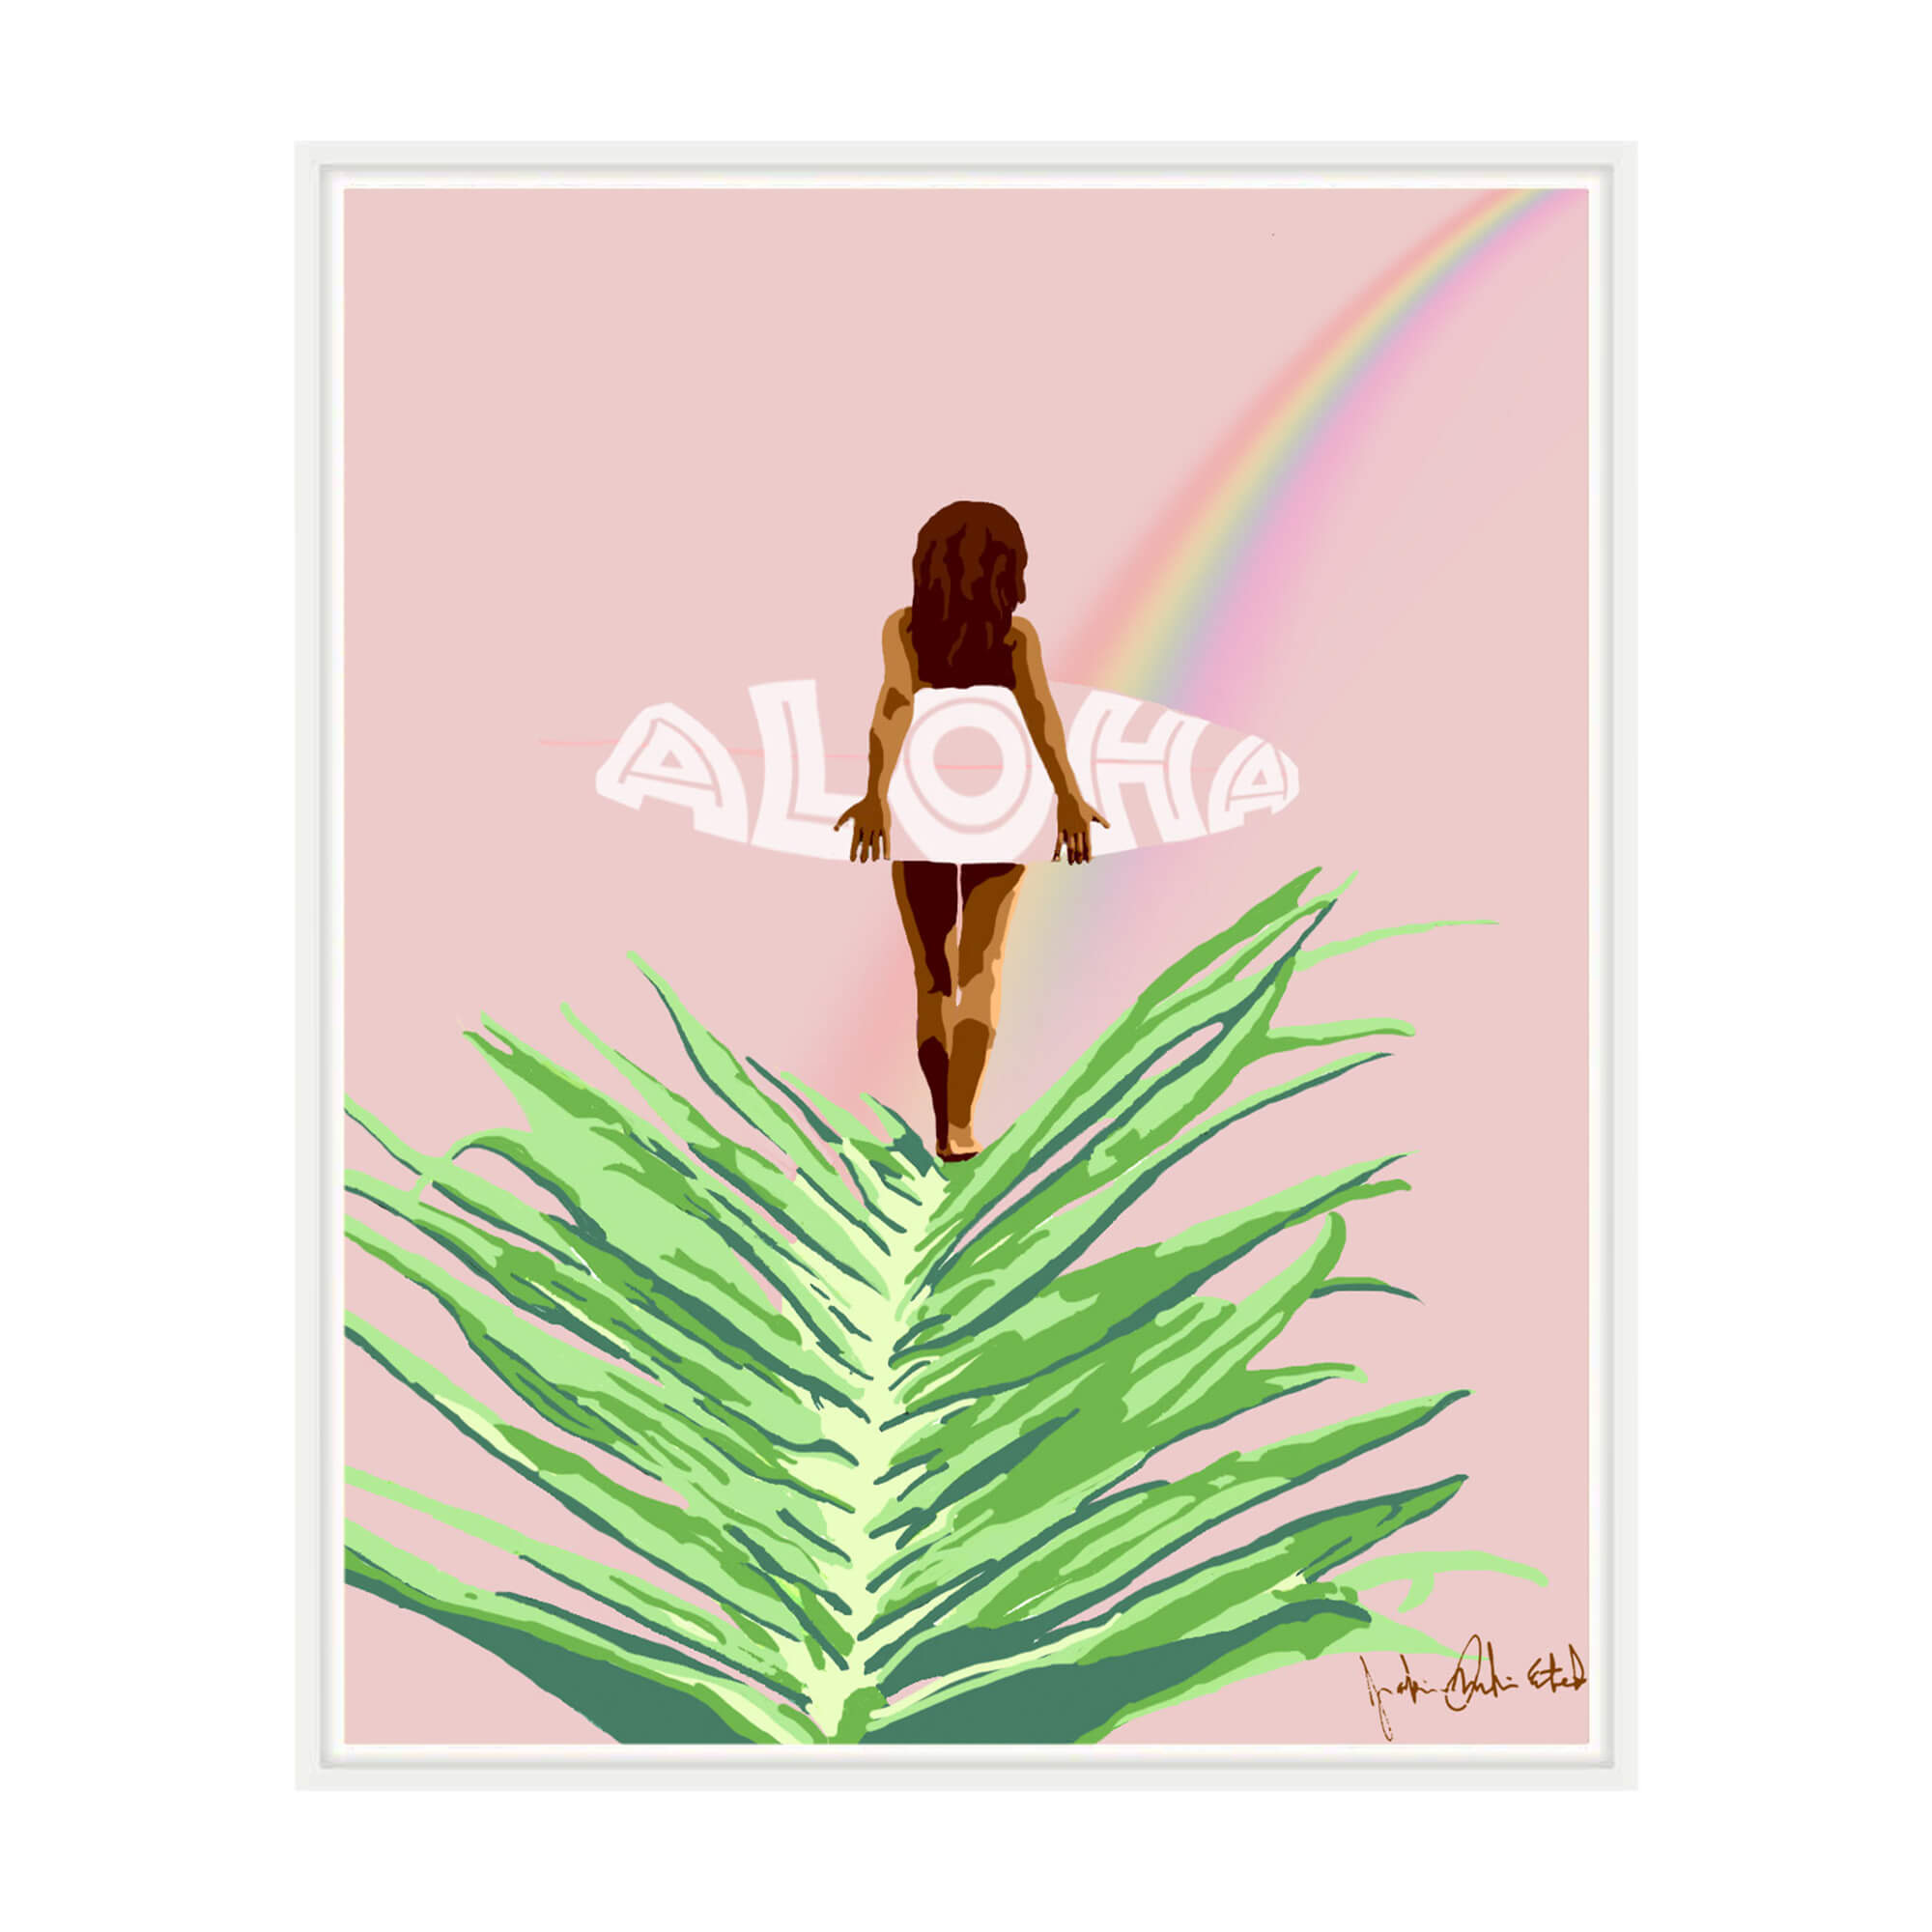 A framed canvas giclée print featuring a woman holding a surfboard following a beautiful rainbow on a pastel pink background by Hawaii artist Jackie Eitel